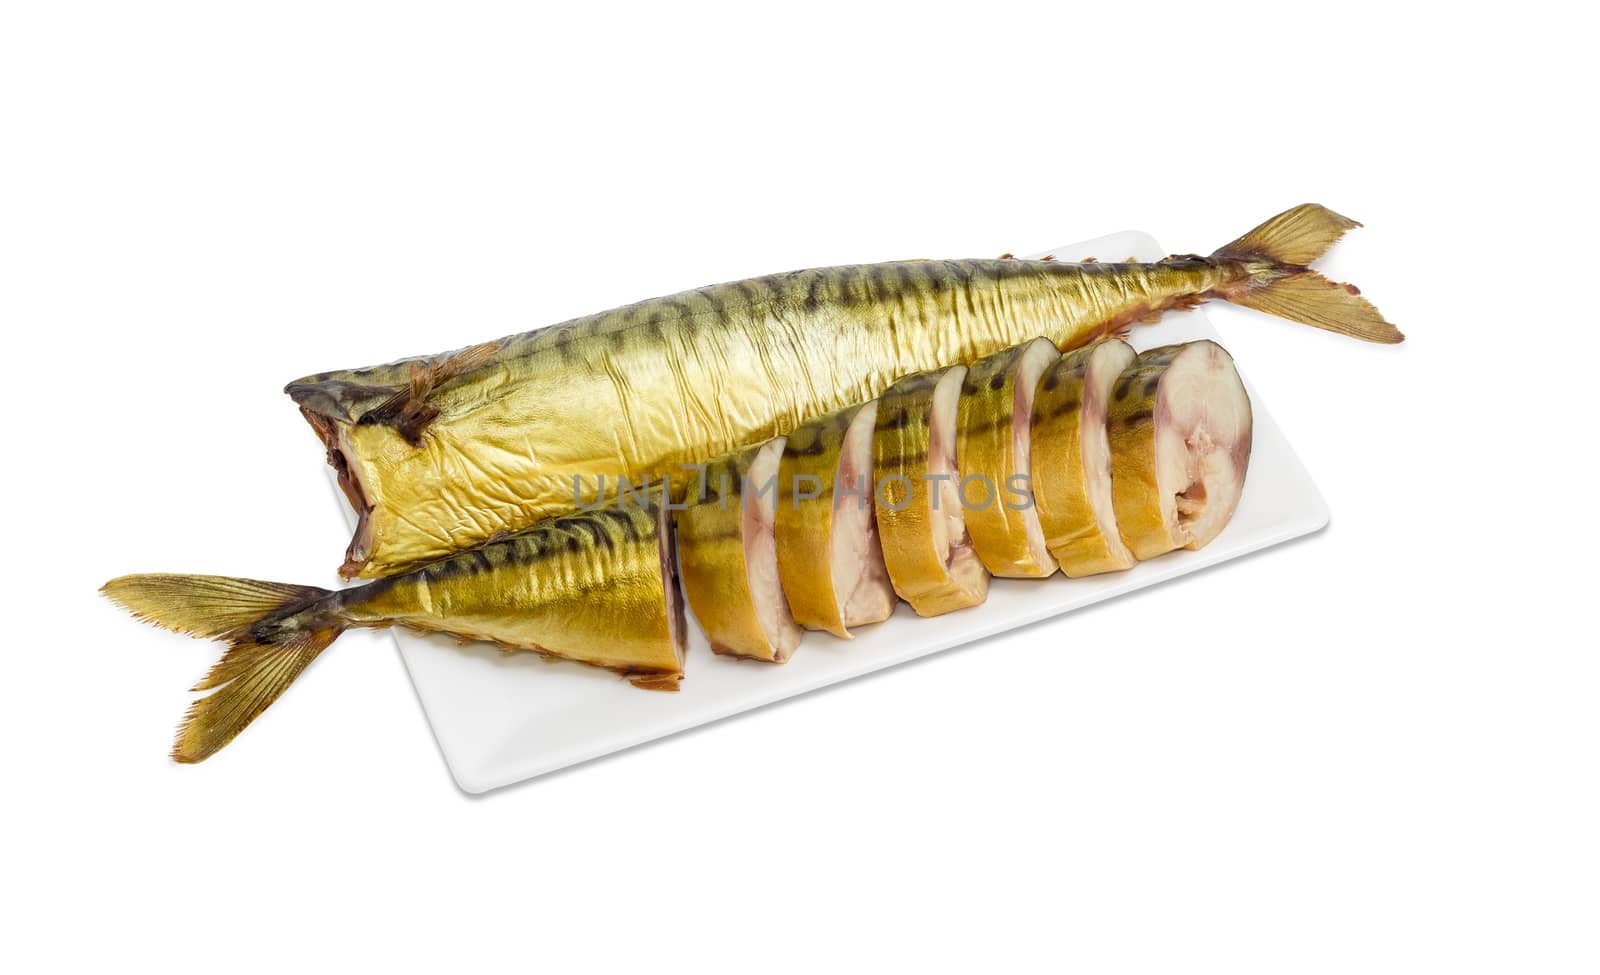 One sliced and one whole smoked Atlantic mackerel on dish by anmbph